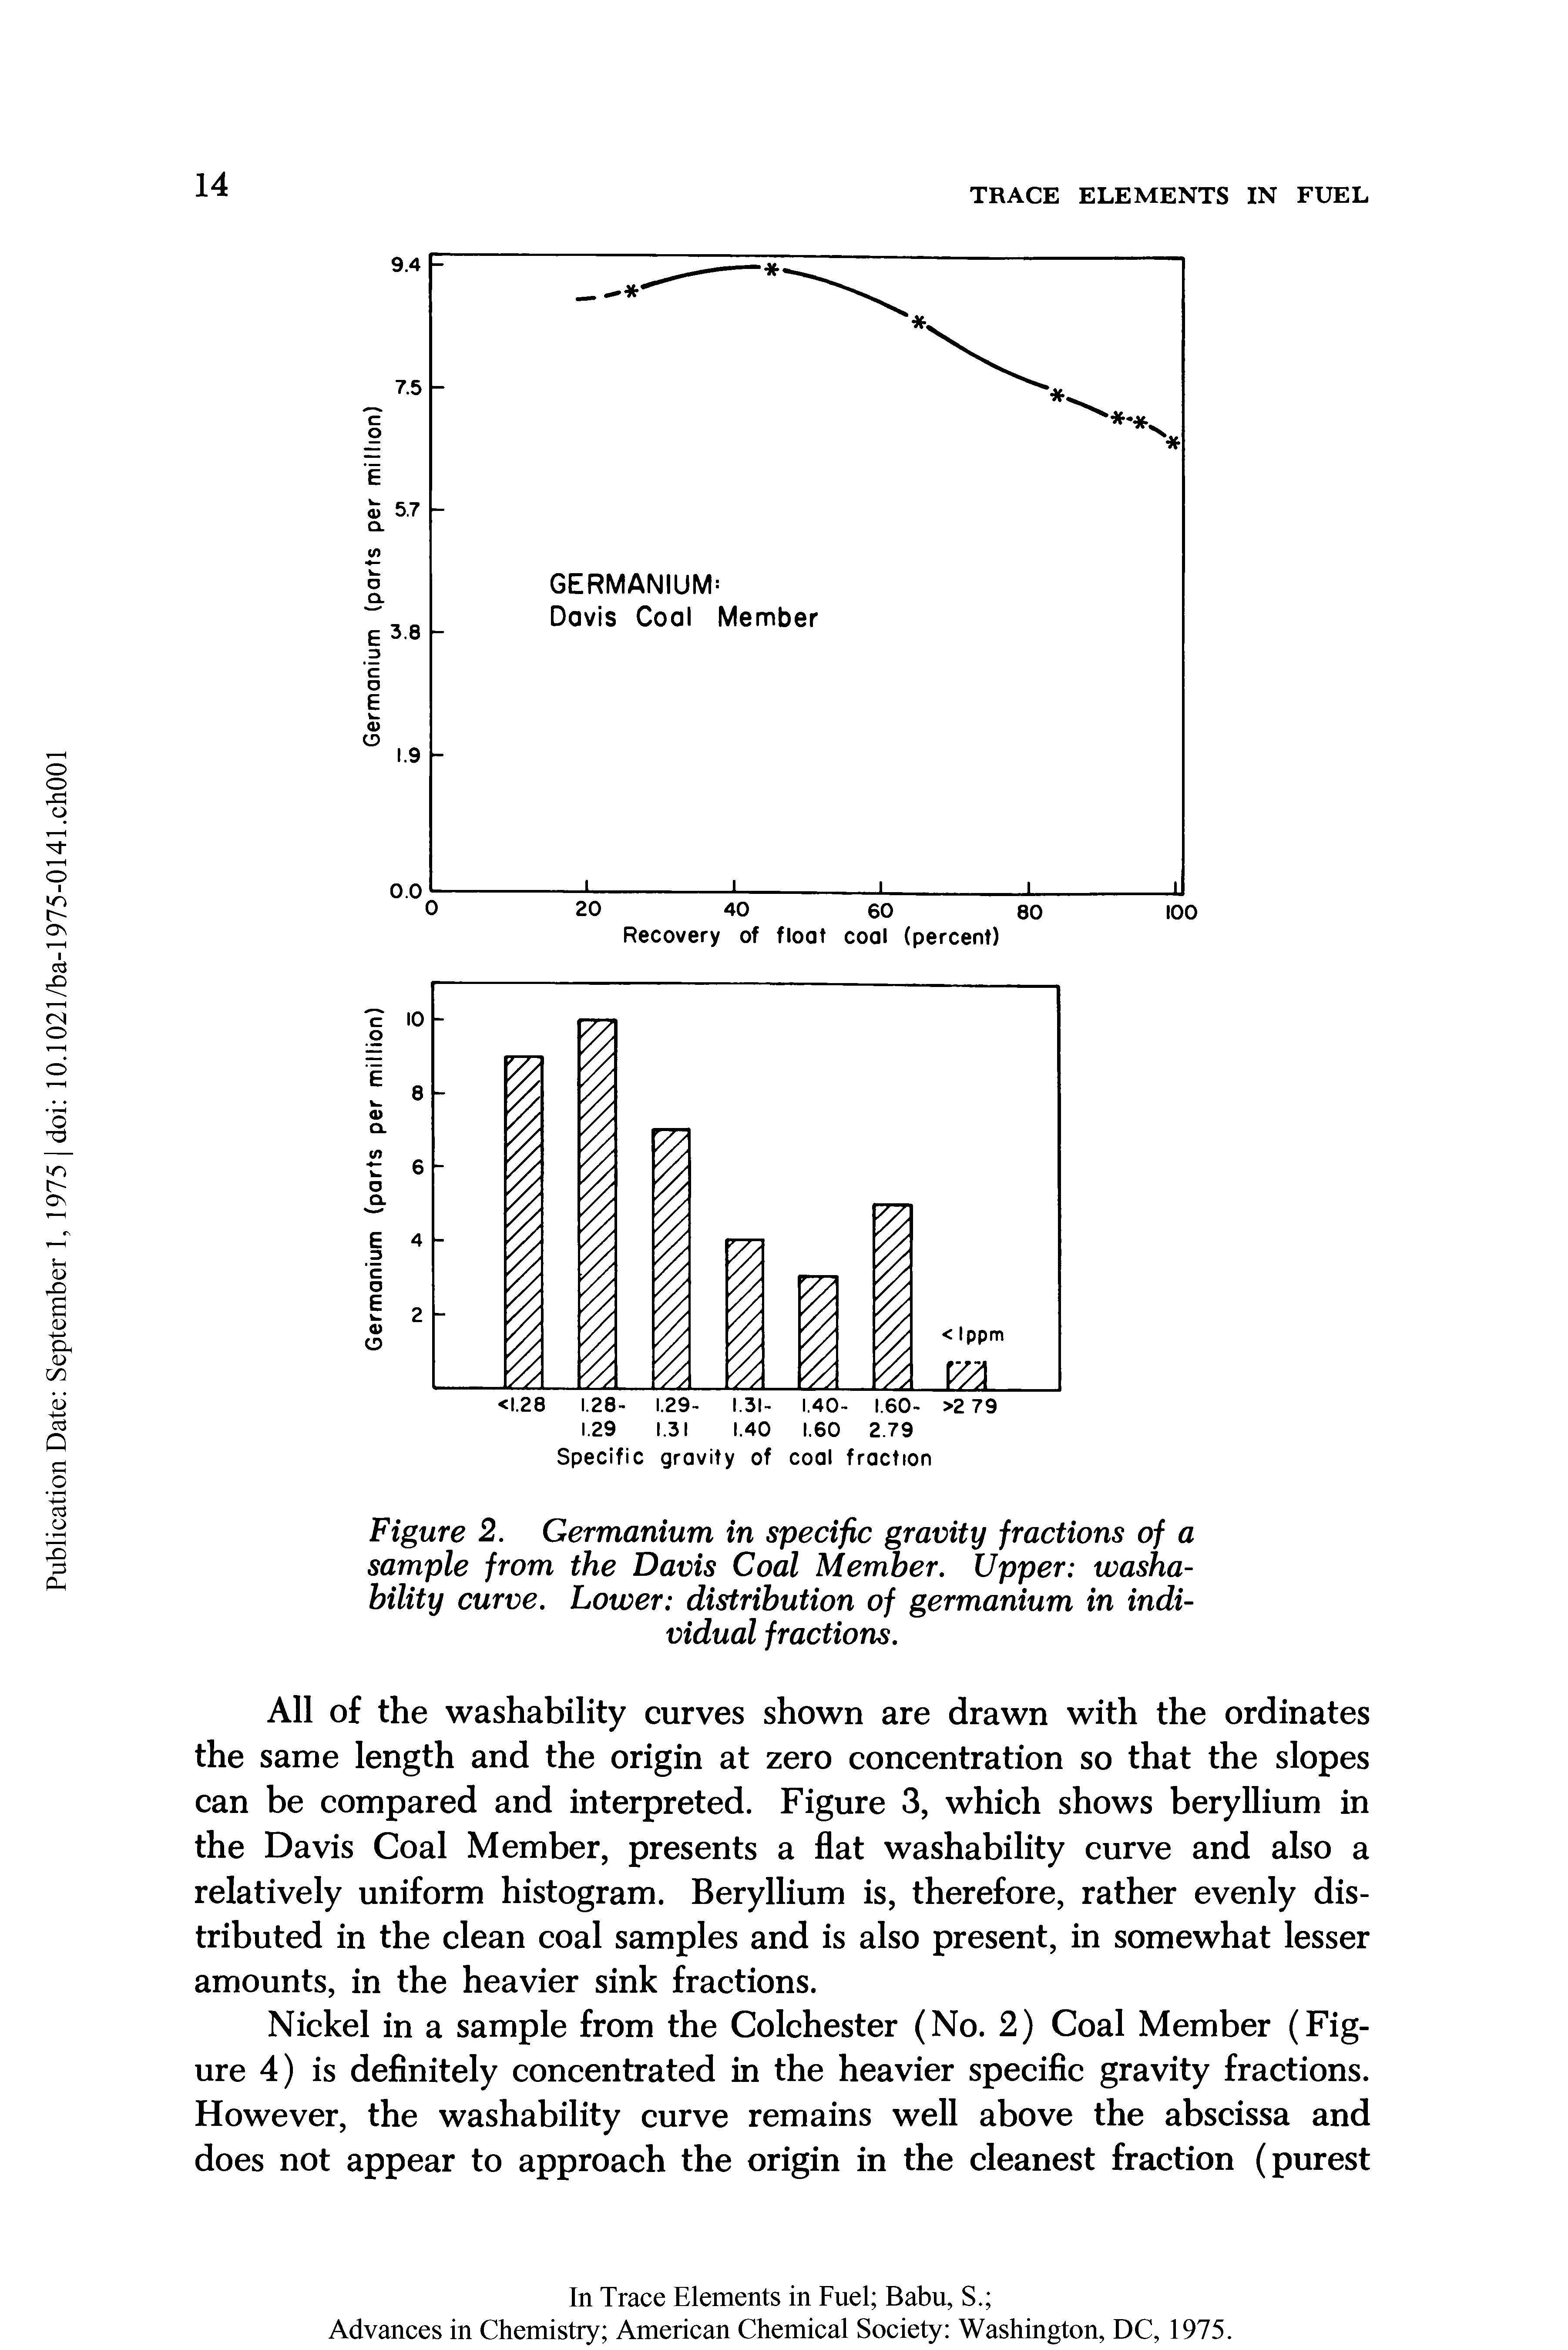 Figure 2. Germanium in specific gravity fractions of a sample from the Davis Coal Member. Upper washa-bility curve. Lower distribution of germanium in individual fractions.